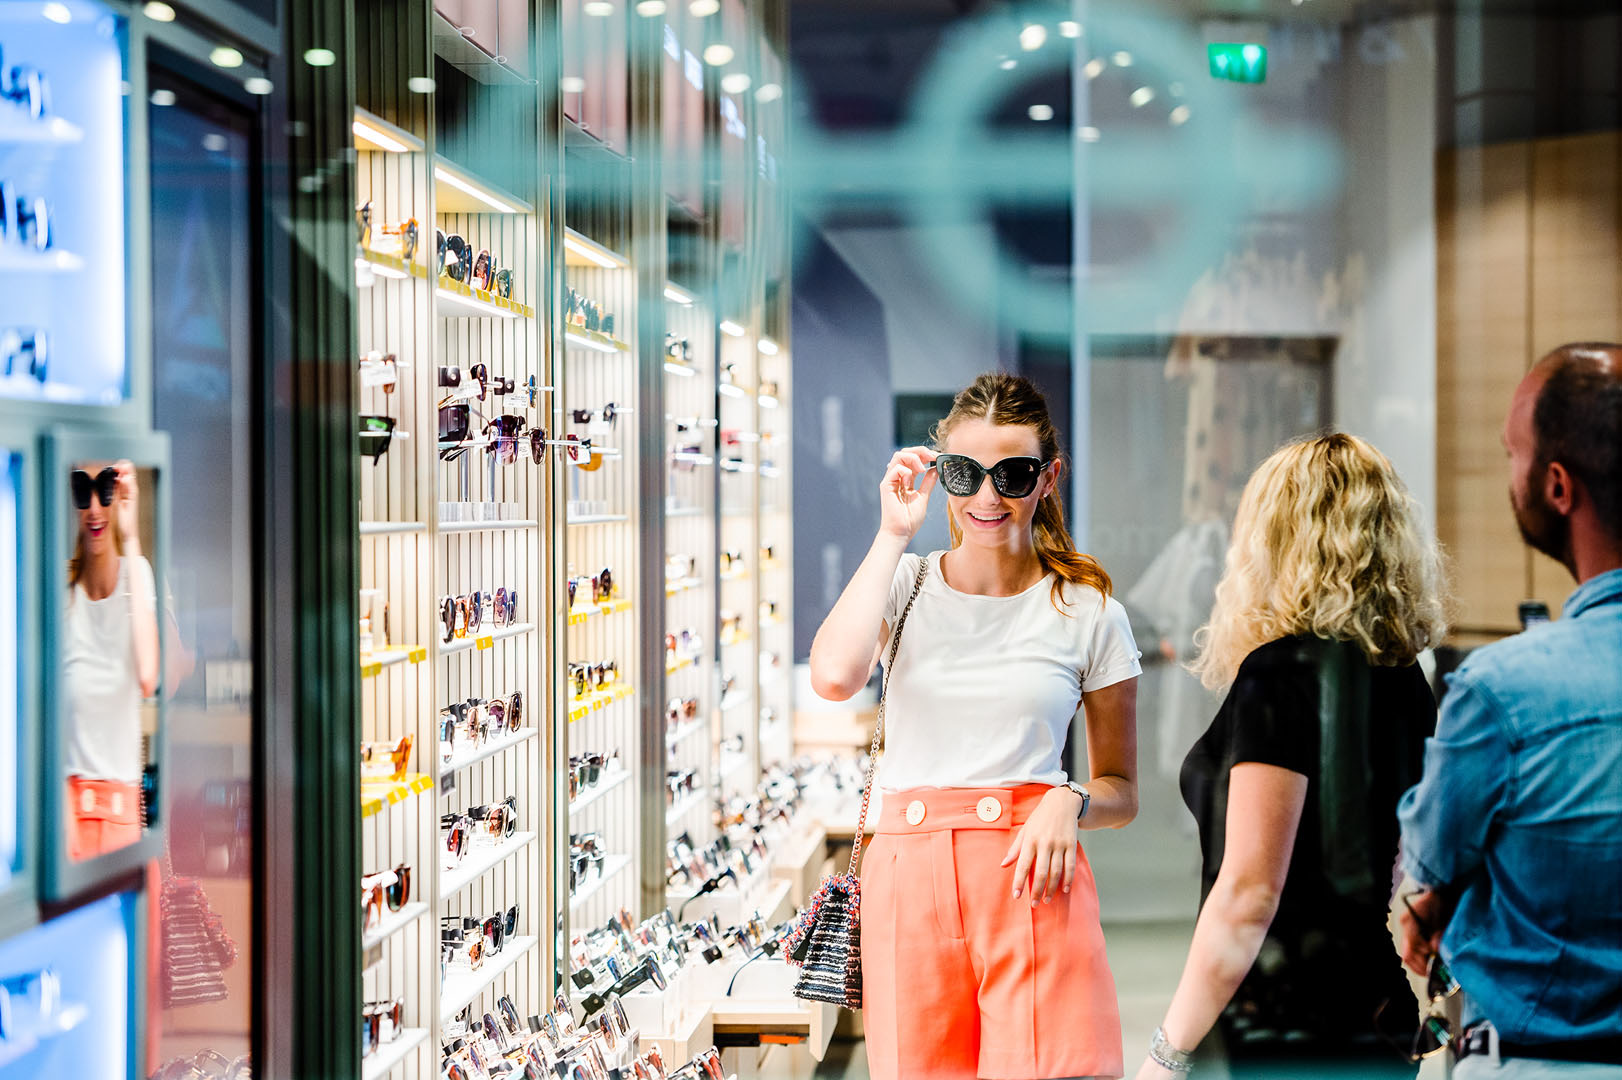 Woman trying on sunglasses in retail setting